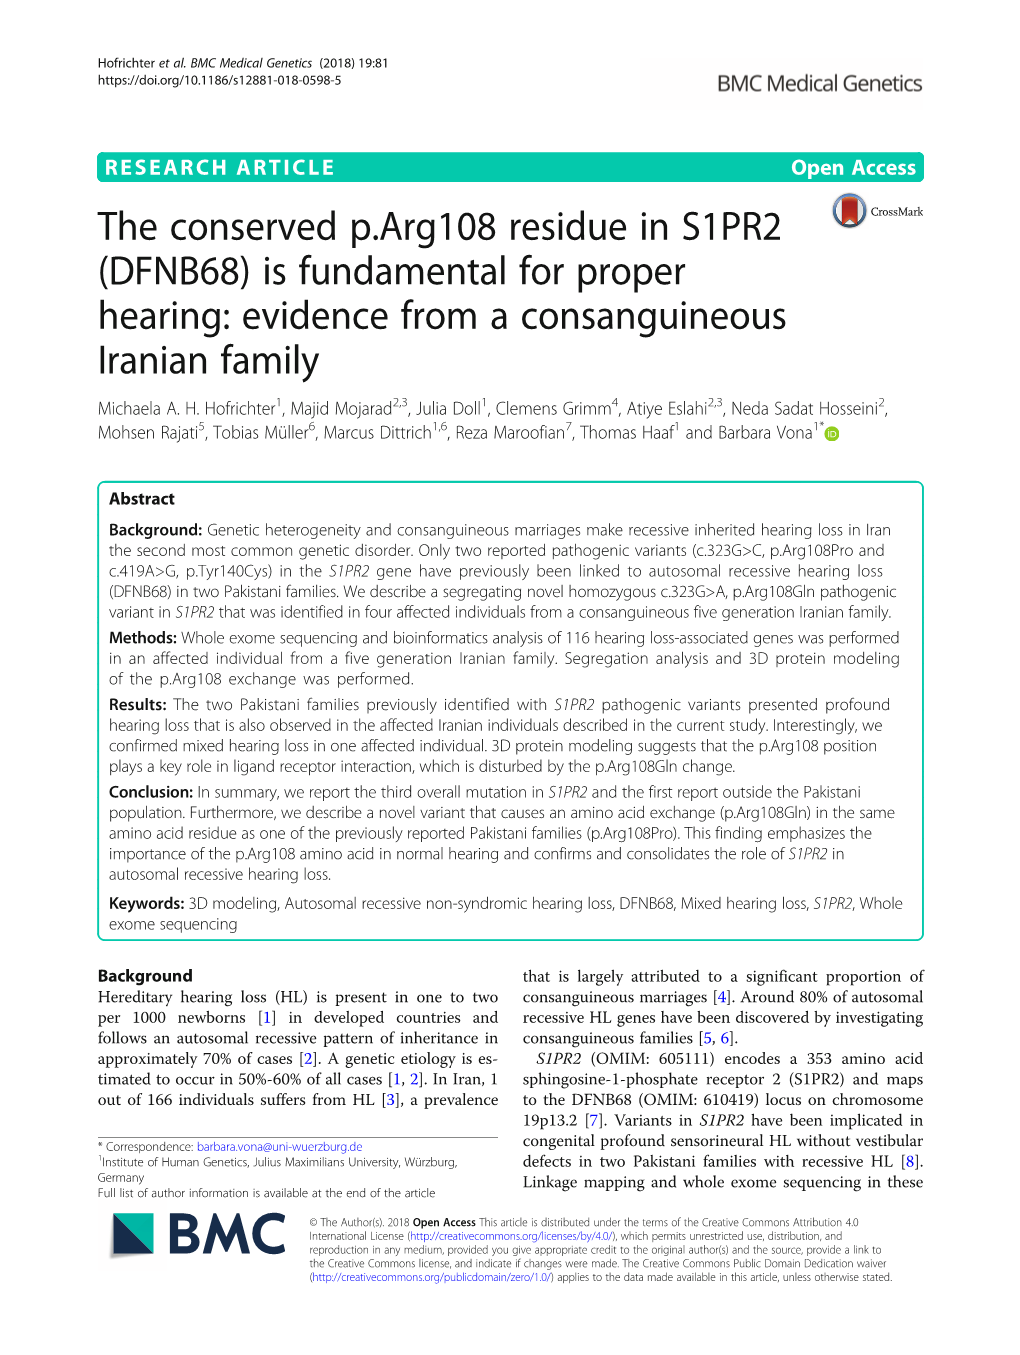 The Conserved P.Arg108 Residue in S1PR2 (DFNB68) Is Fundamental for Proper Hearing: Evidence from a Consanguineous Iranian Family Michaela A